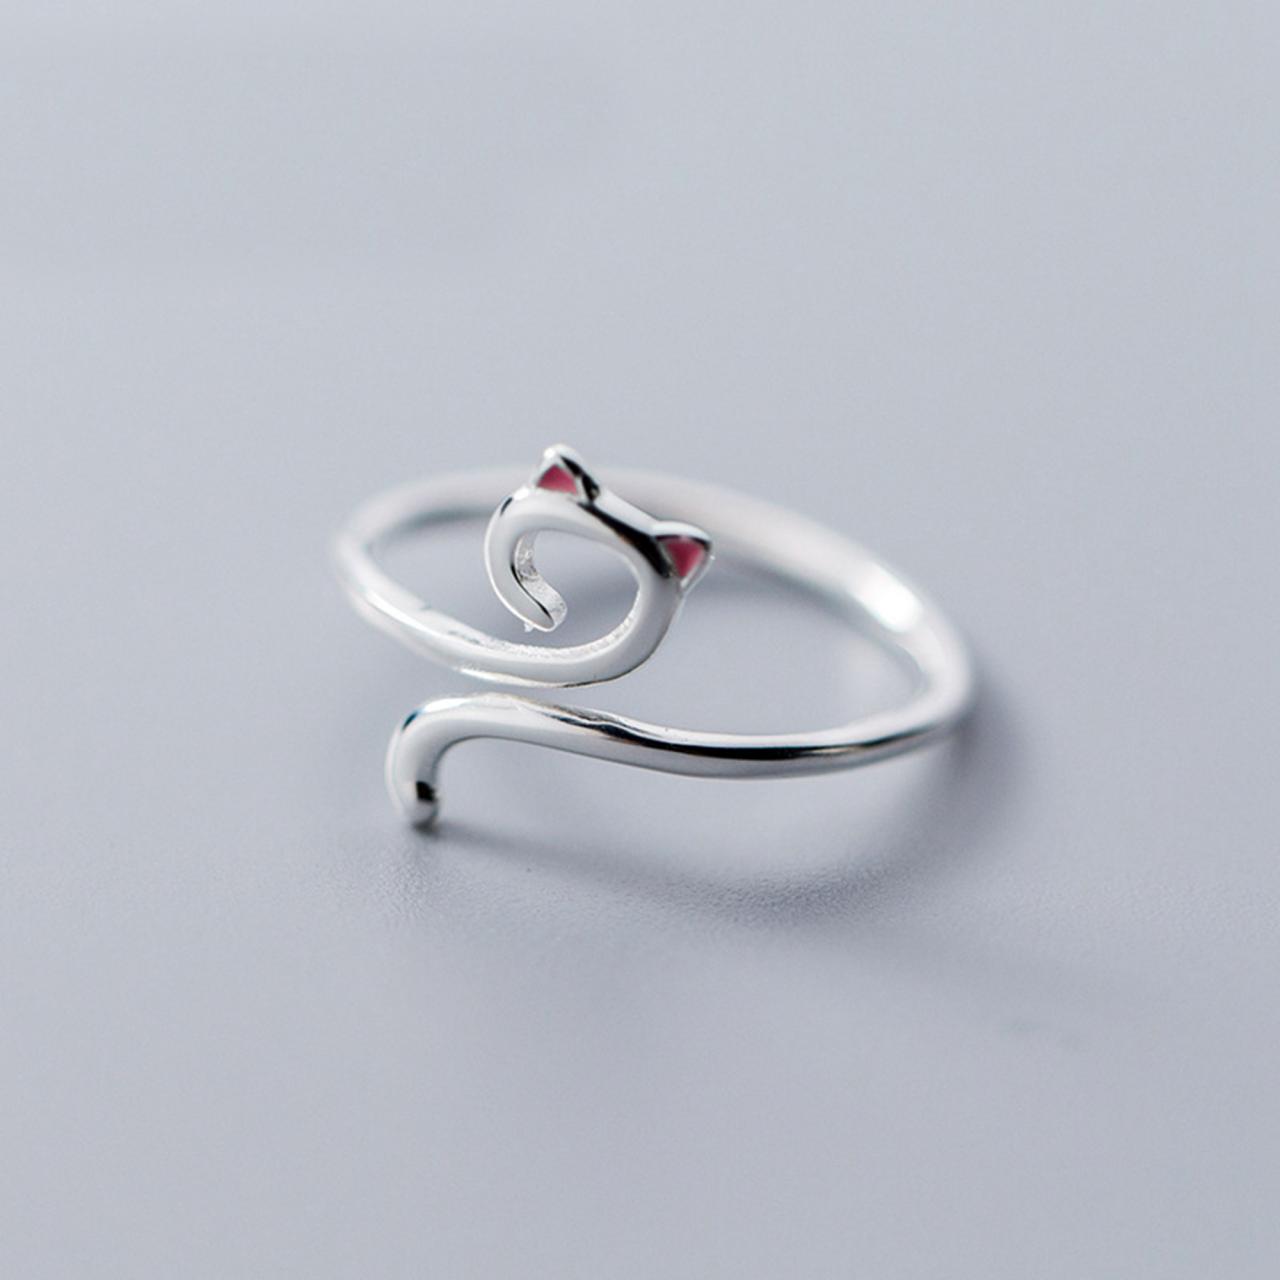 Cute Dainty Cat With Red Ear Ring, Sterling Silver Adjustable Cat Ring, Minimalist Rings, Women Ring, Everyday Jewelry